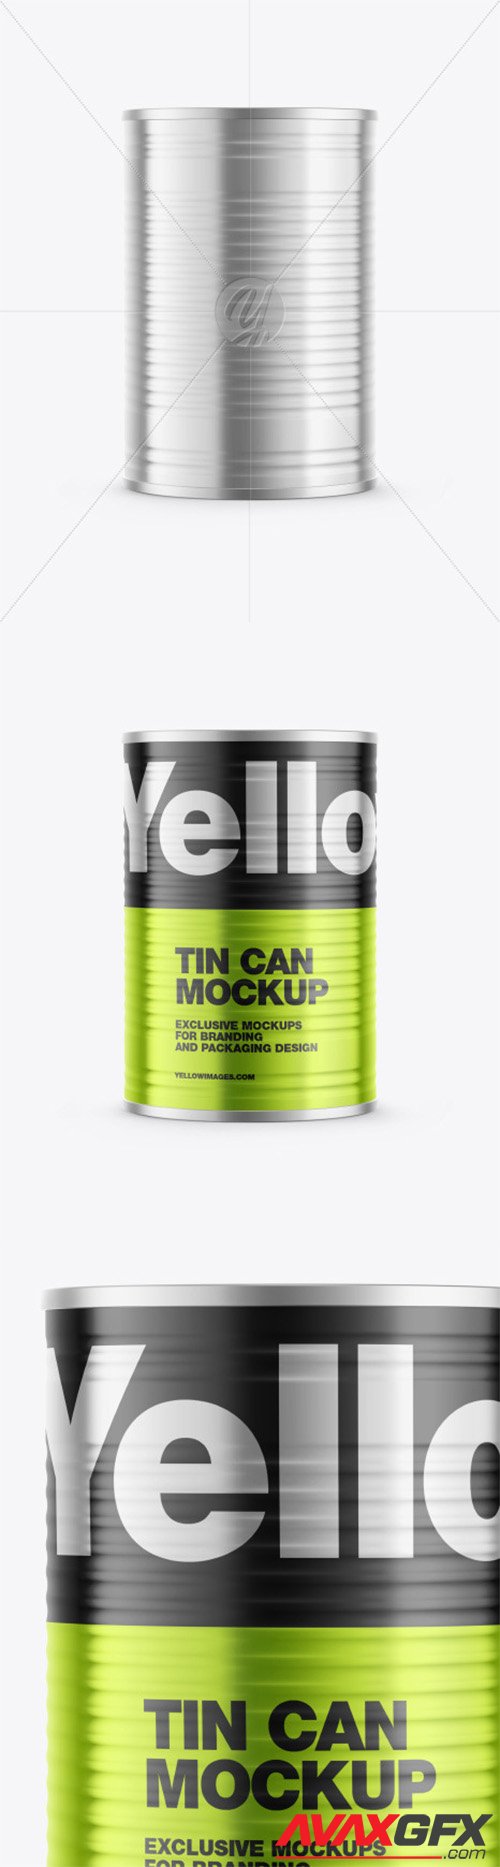 Download Psd Mockups Glossy Olive Oil Tin Can Psd Mockup Psd PSD Mockup Templates